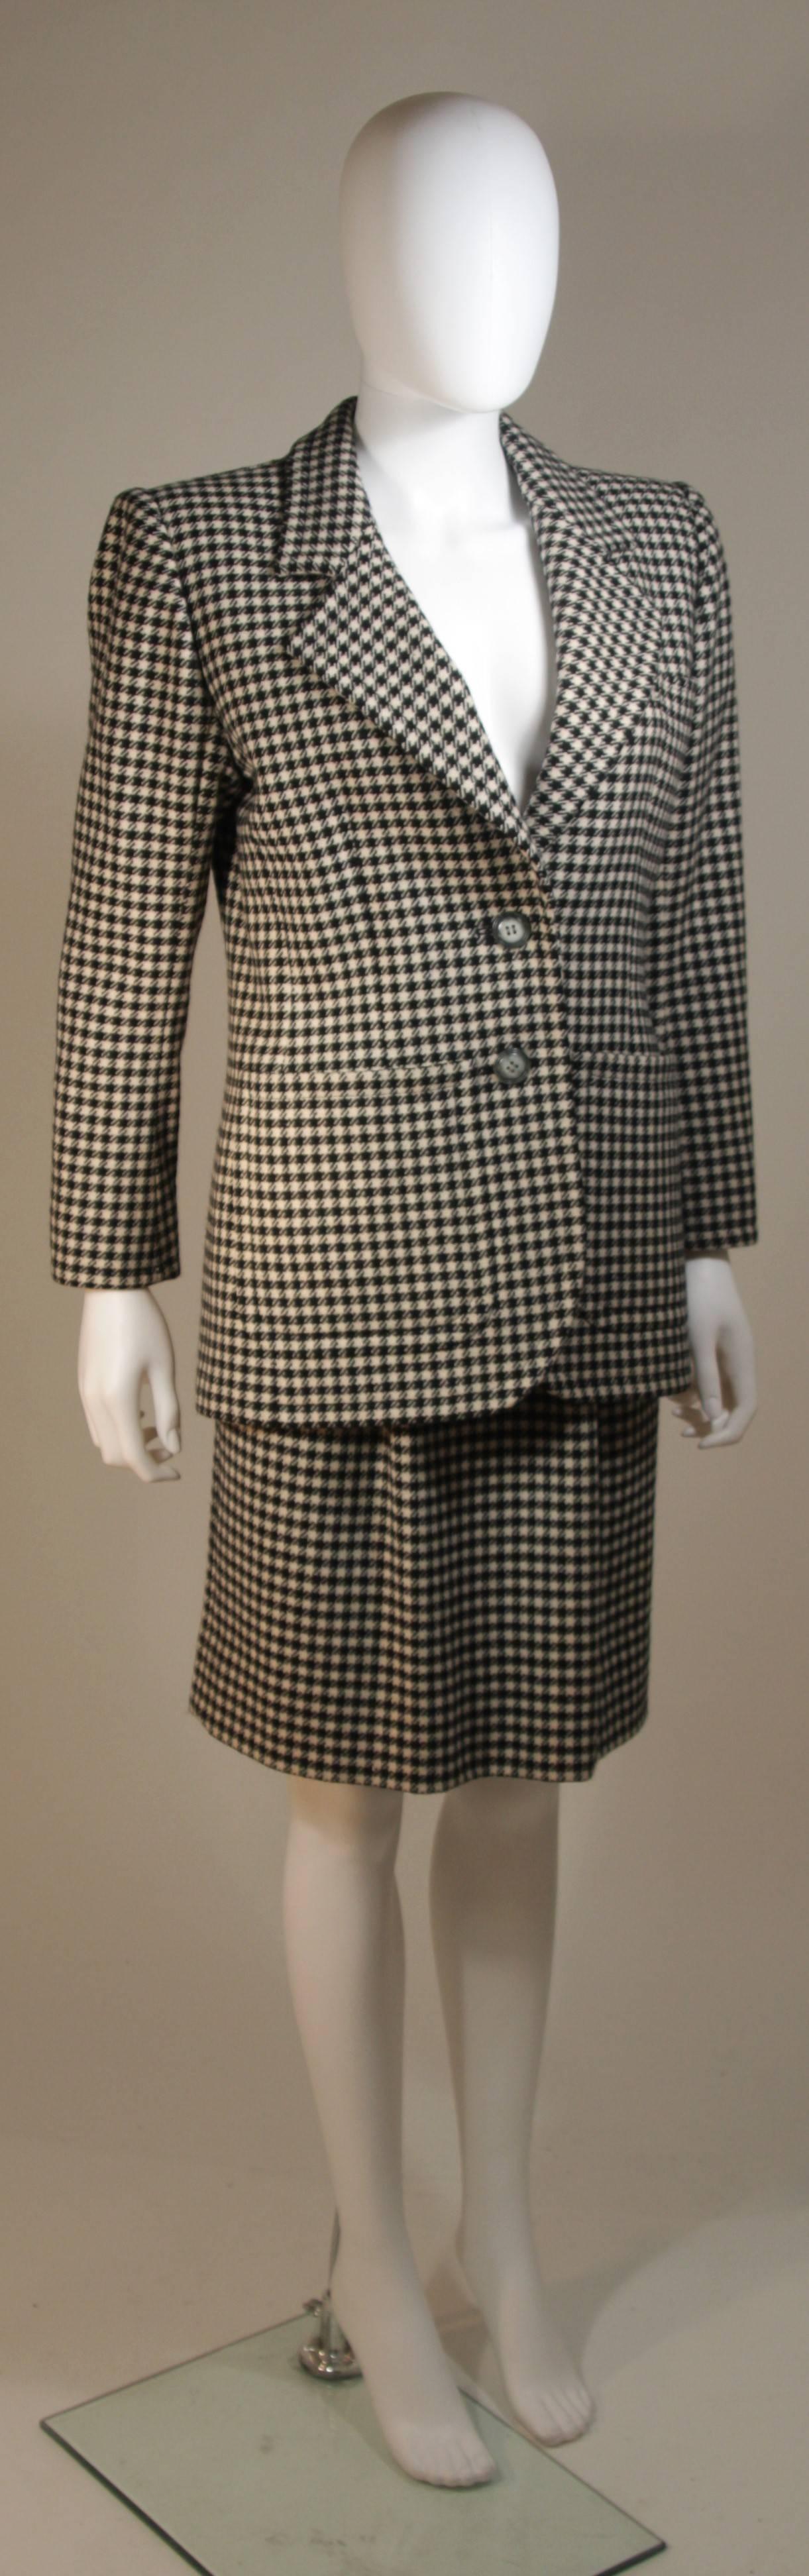 YVES SAINT LAURENT Black and White Wool Houndstooth Skirt Suit Size 36 40 In Excellent Condition For Sale In Los Angeles, CA